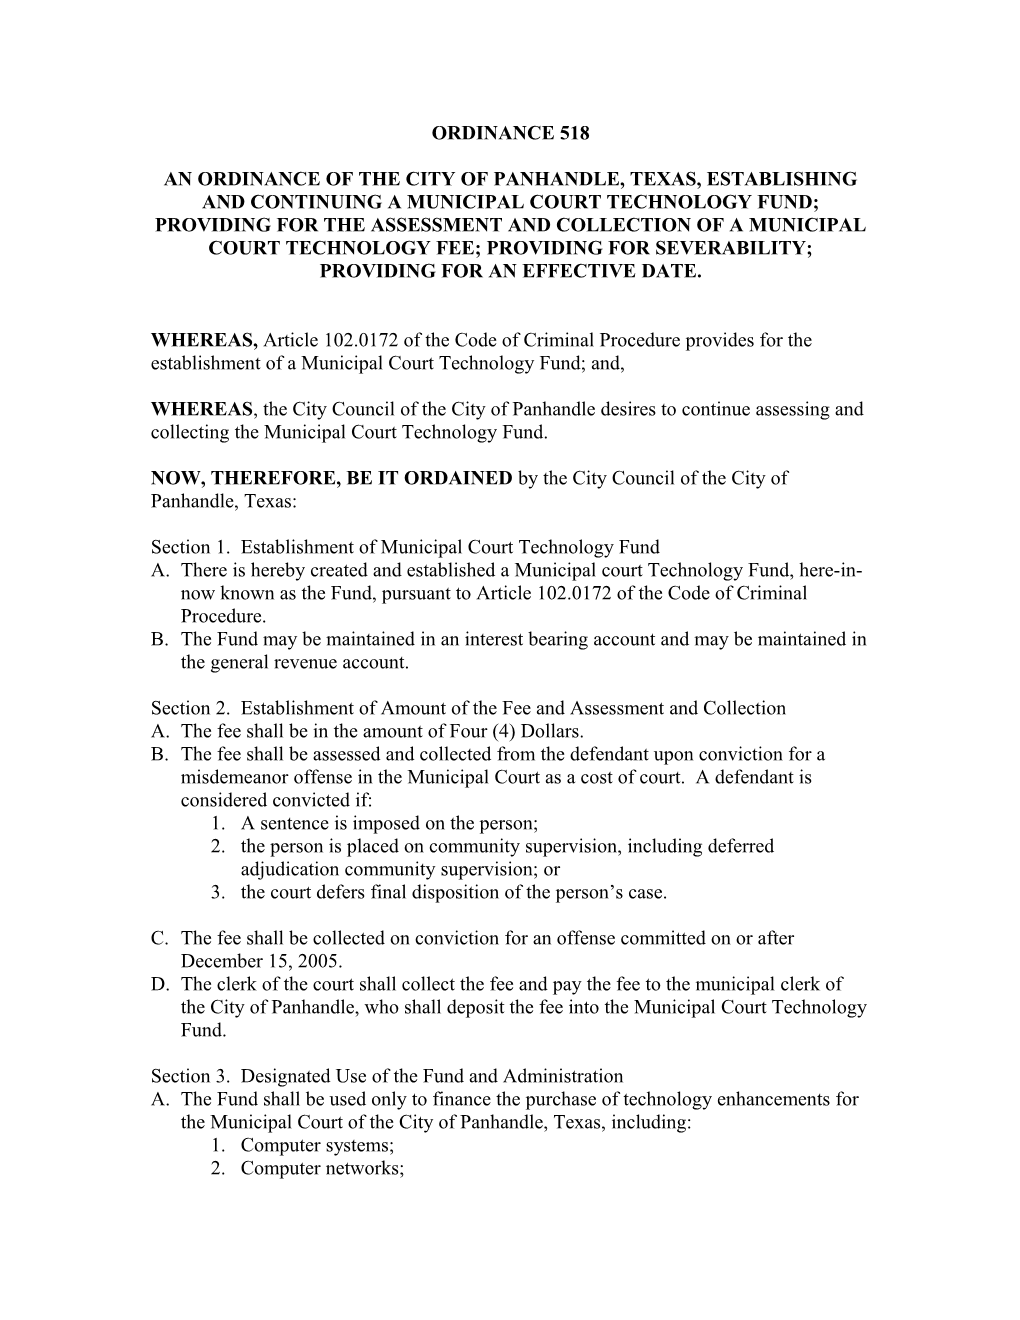 An Ordinance of the City of Panhandle, Texas, Establishing and Continuing a Municipal